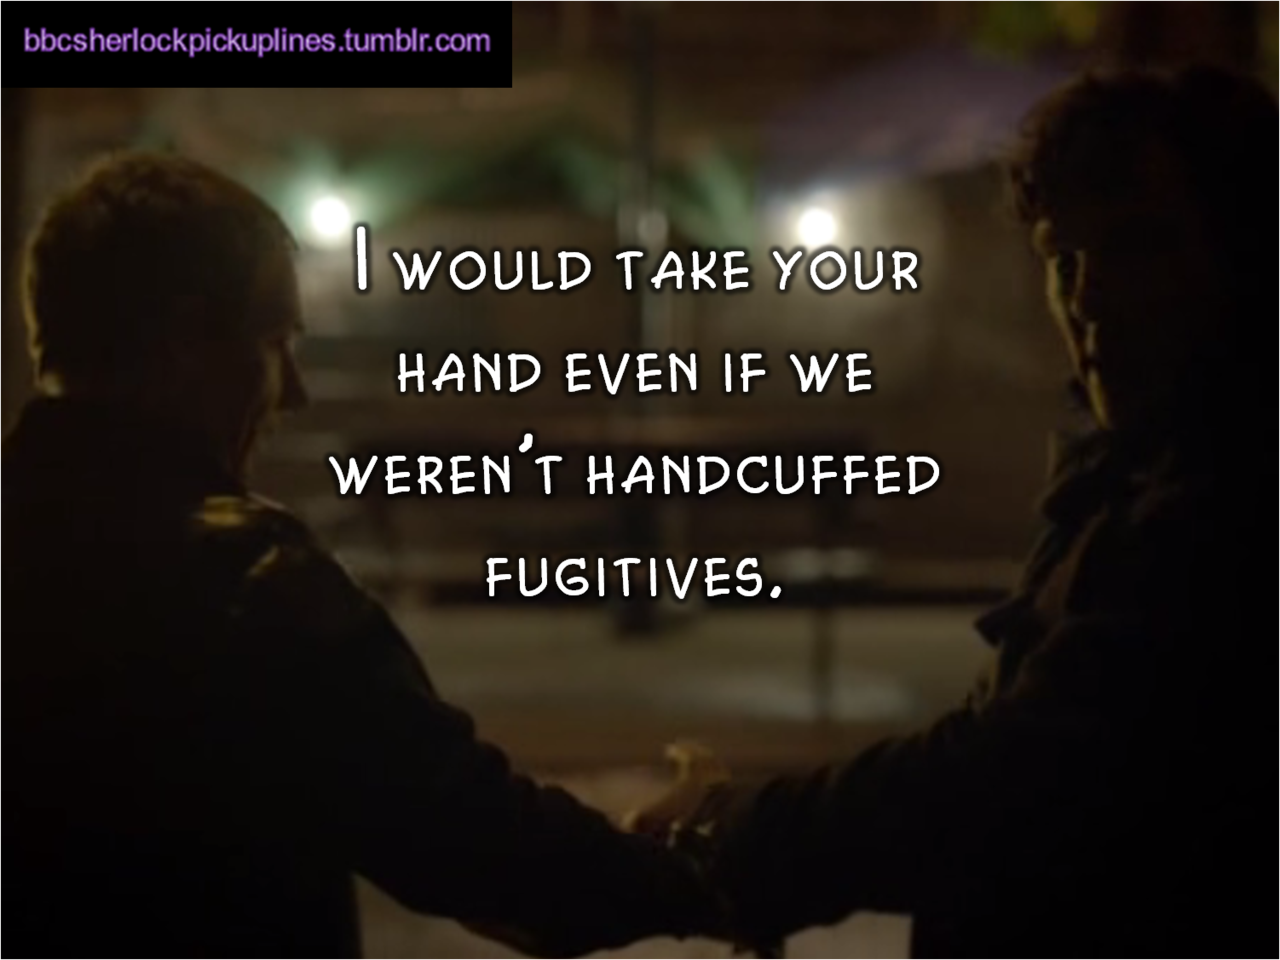 &ldquo;I would take your hand even if we weren&rsquo;t handcuffed fugitives.&rdquo;